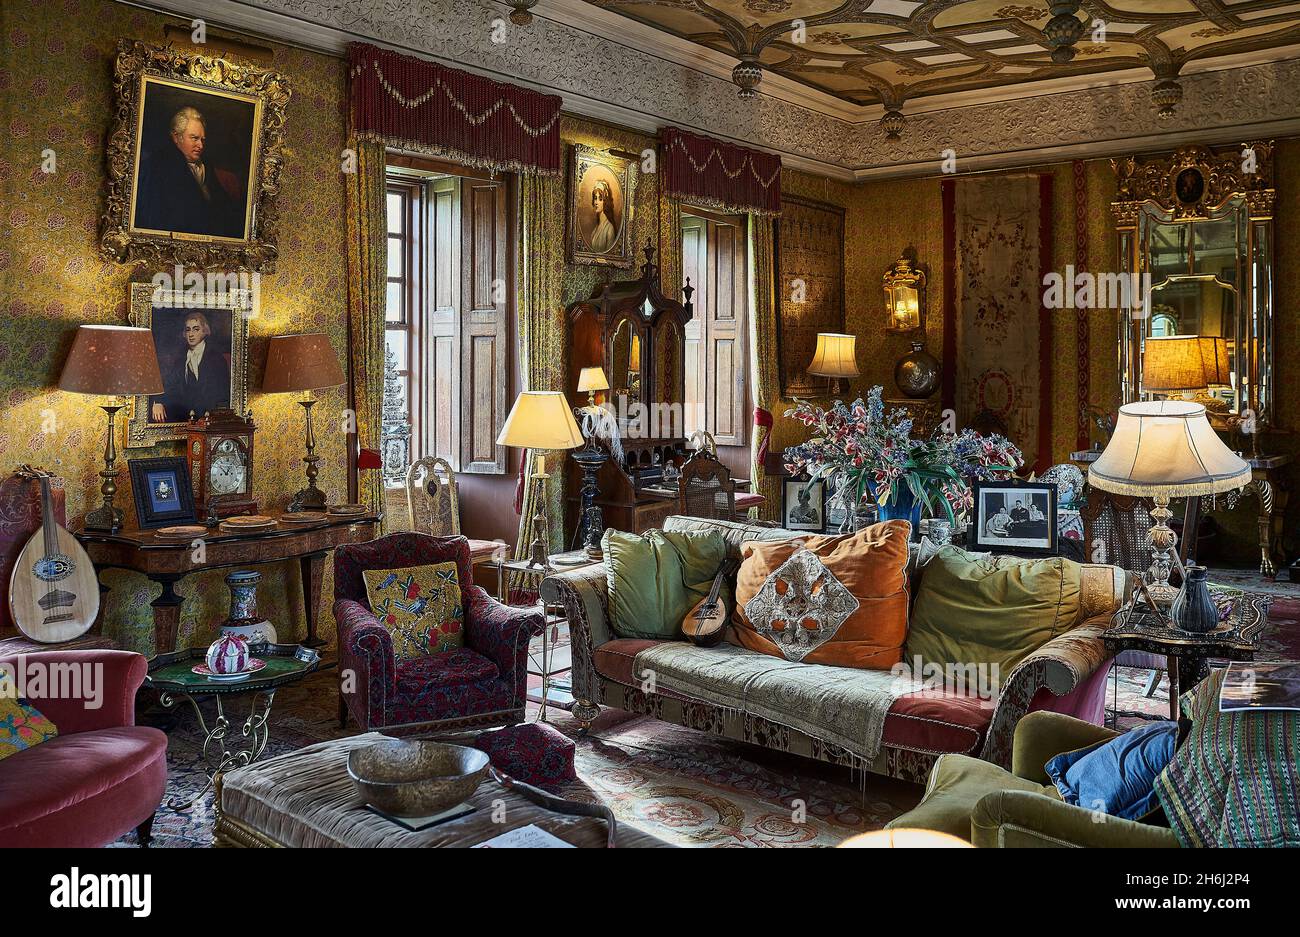 The Opulent living room of an English Historic House Stock Photo